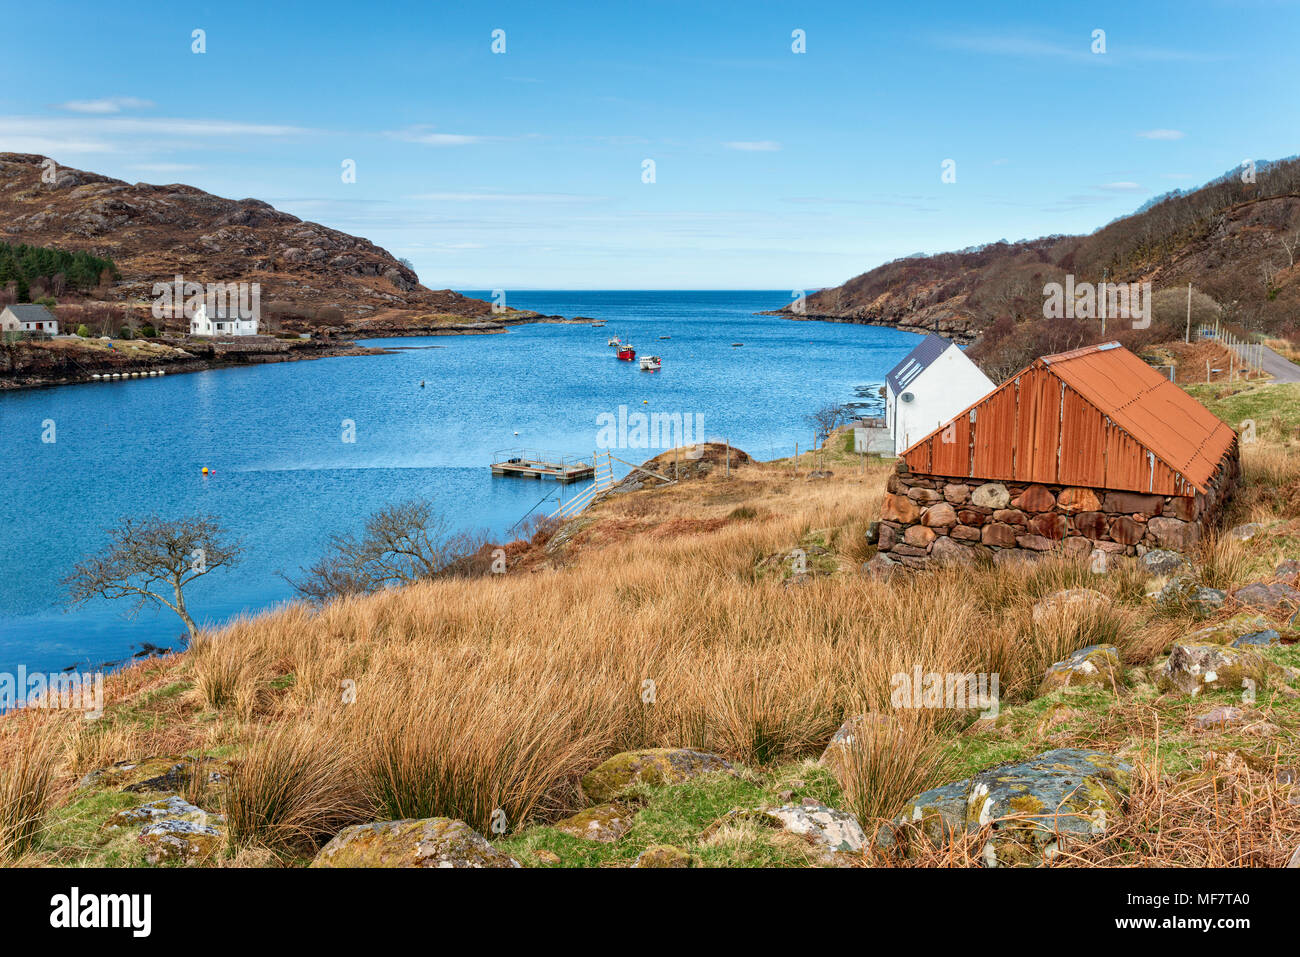 Ardheslaig a small village on the shores of Loch Torridon at the northern end of the Applecross peninsula in the Scottish Highlands. Stock Photo